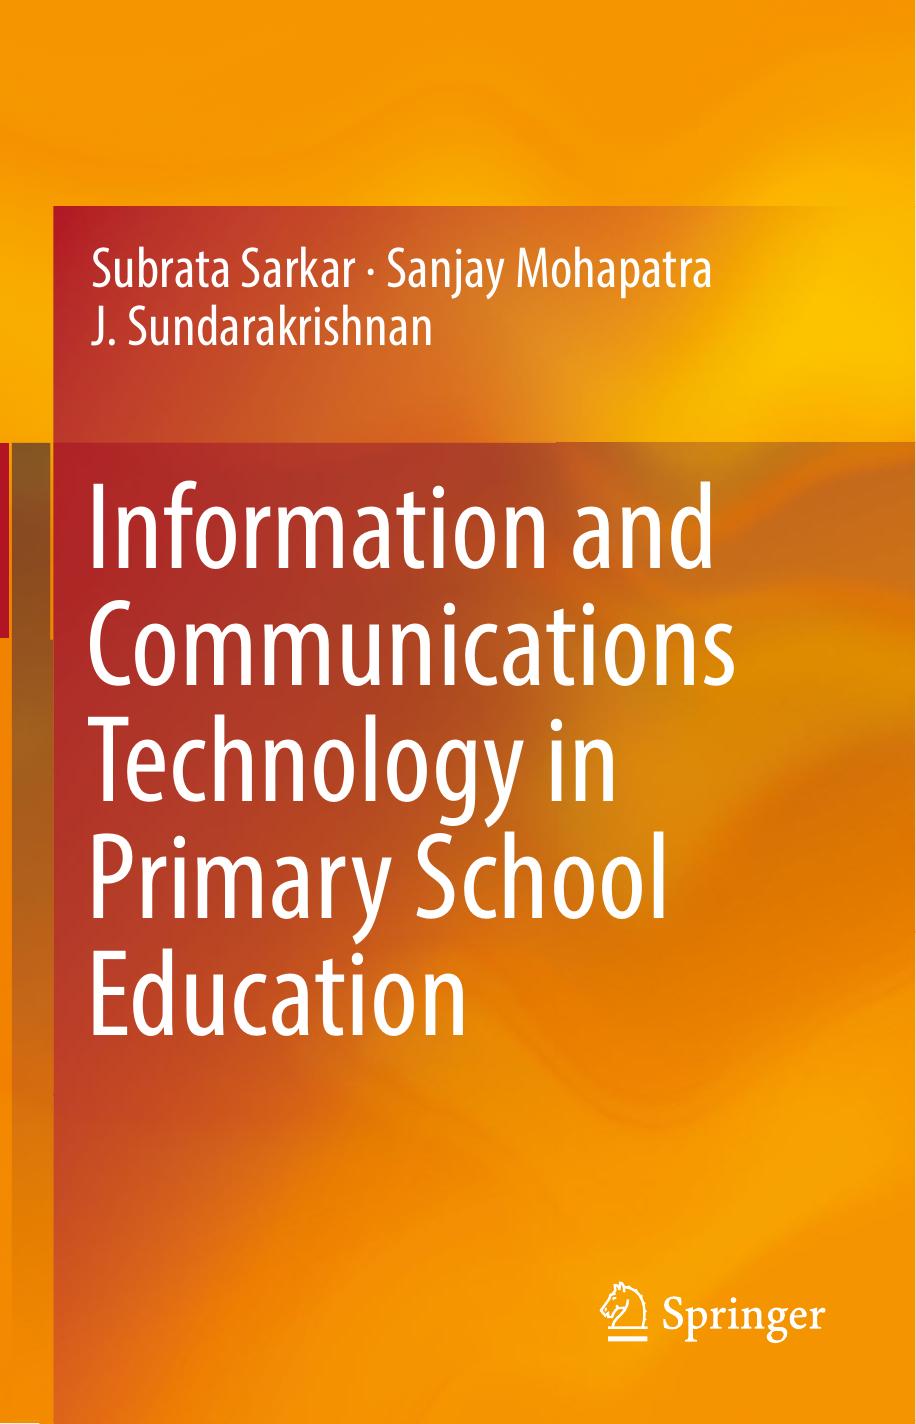 Information and Communications Technology 2017